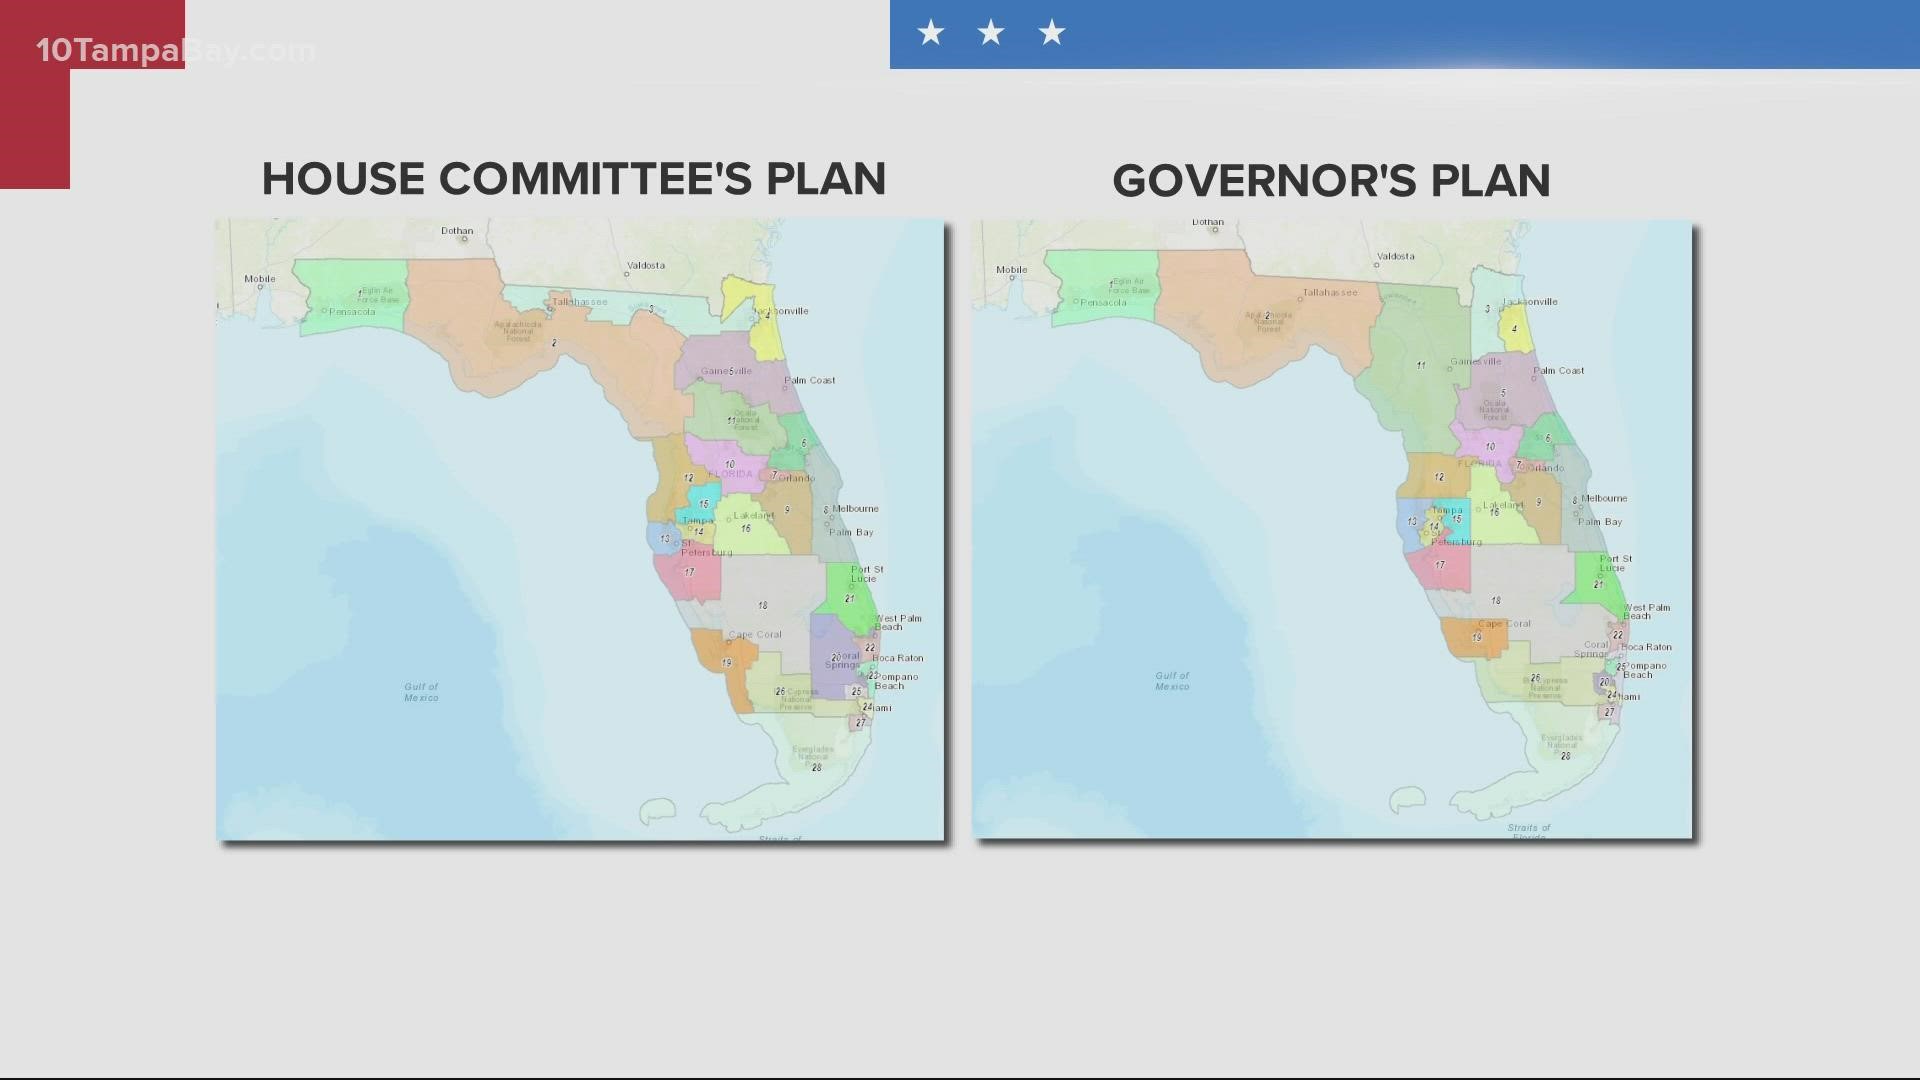 We asked an expert on redistricting what are the options now that the Florida Supreme Court has refused to hear the governor's case.